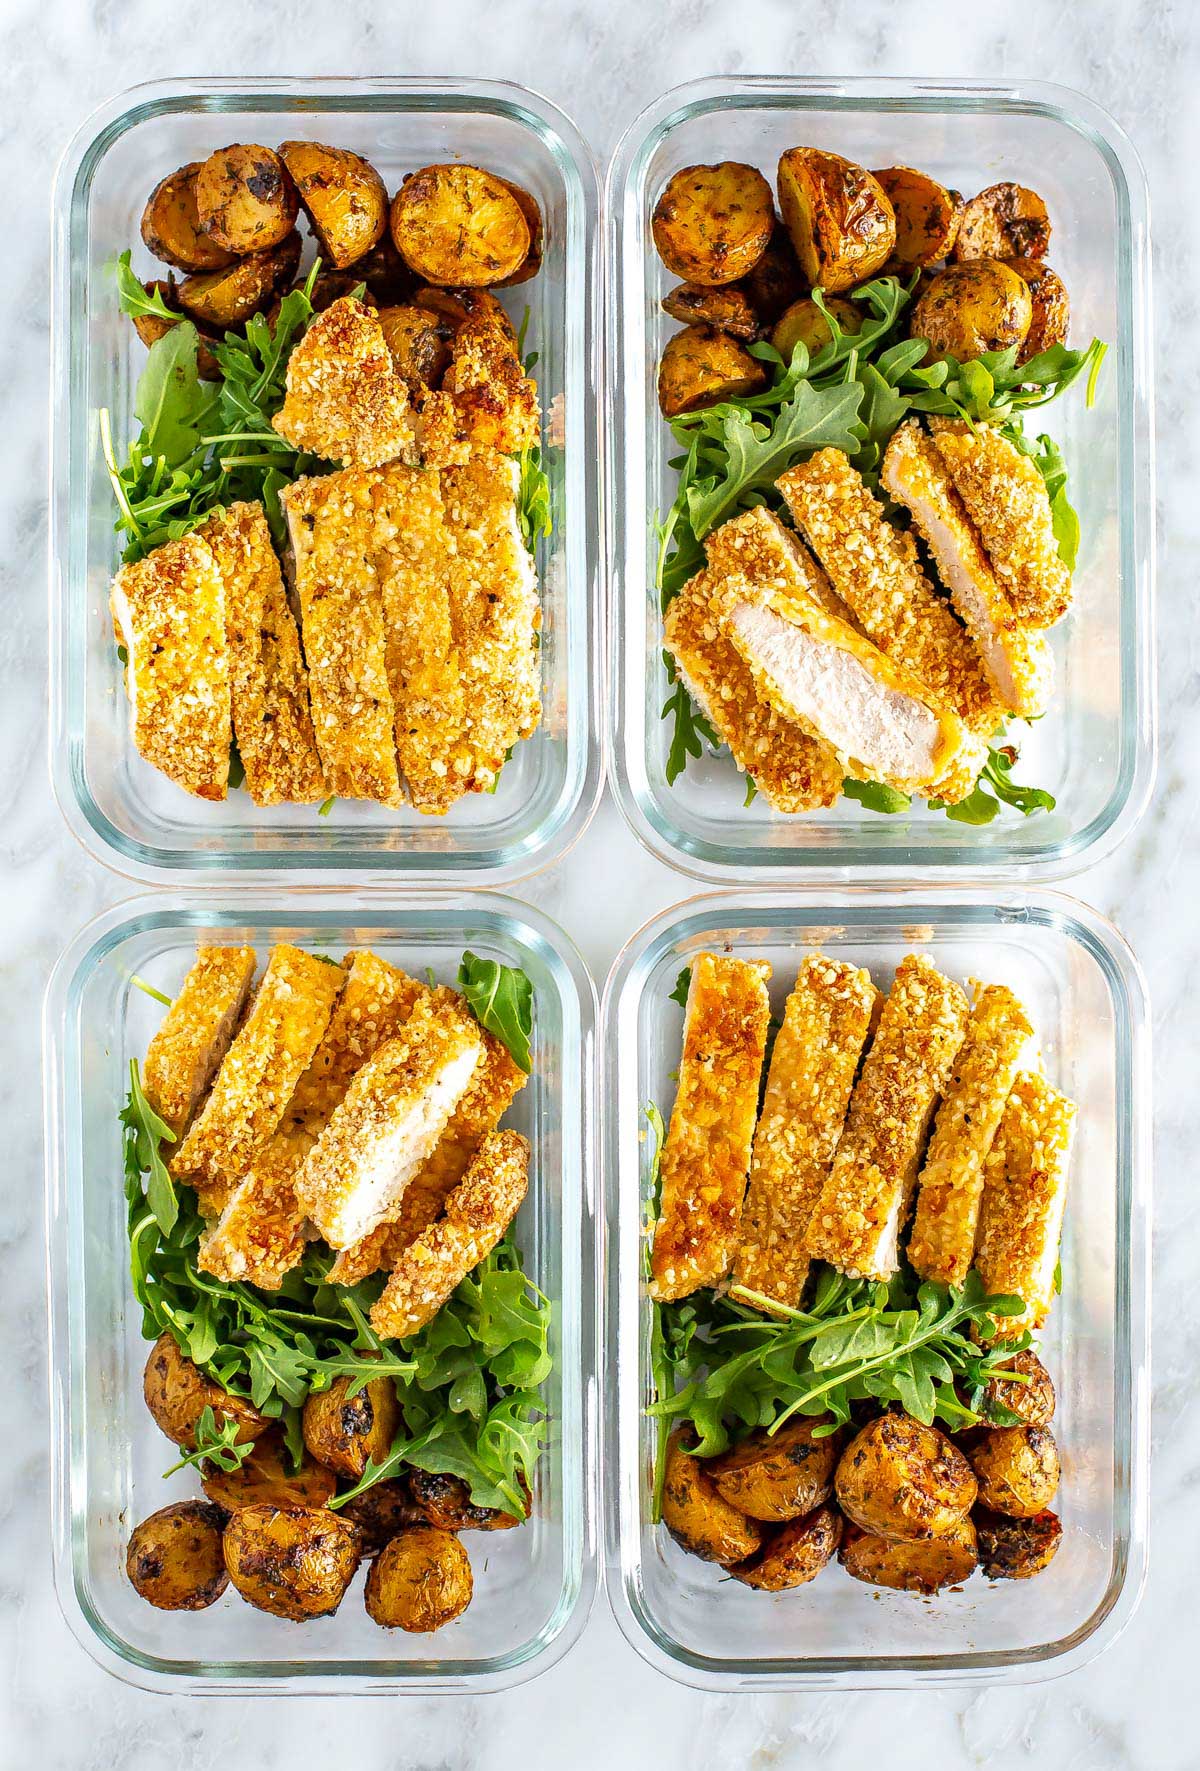 Four meal prep containers, each with a bed of arugula, lemon dill potatoes and a sliced chicken cutlet on top.